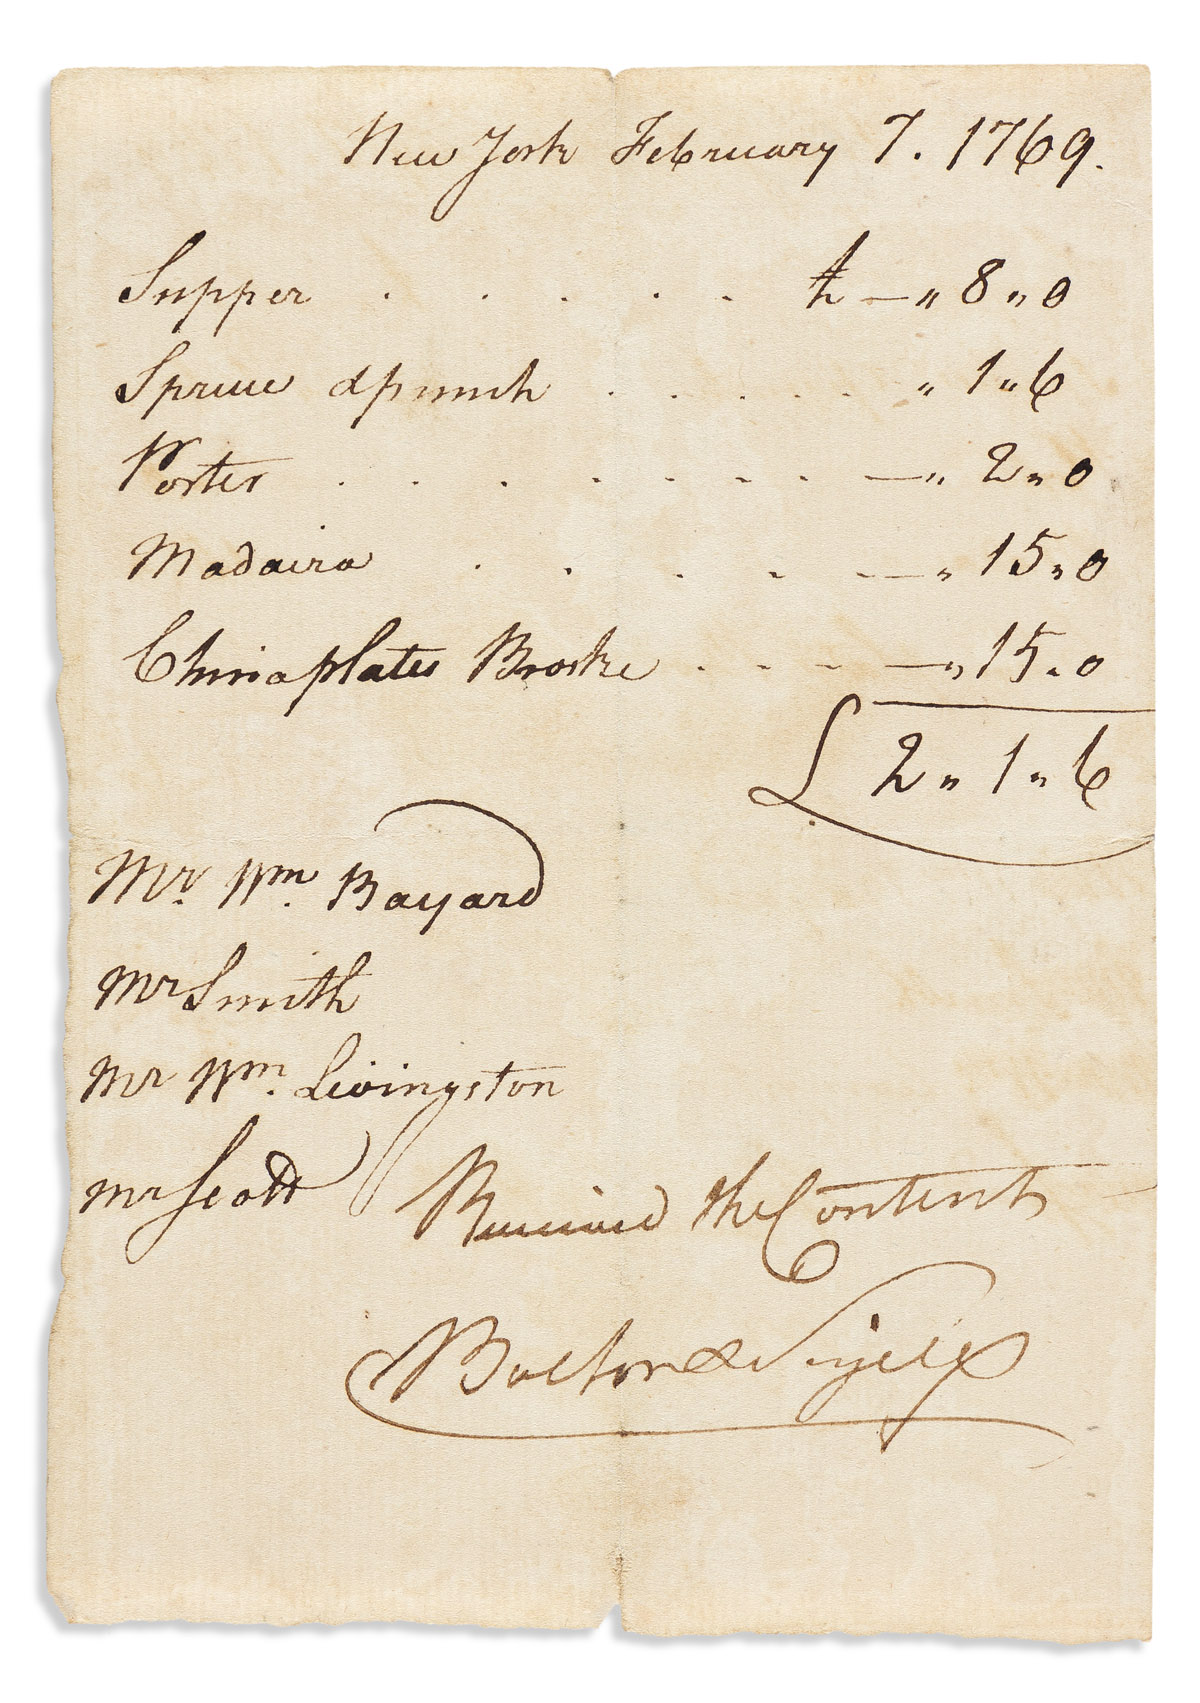 (AMERICAN REVOLUTION--PRELUDE.) Receipt for drinks and damages incurred by the New York Triumvirate at a famed Sons of Liberty tavern.